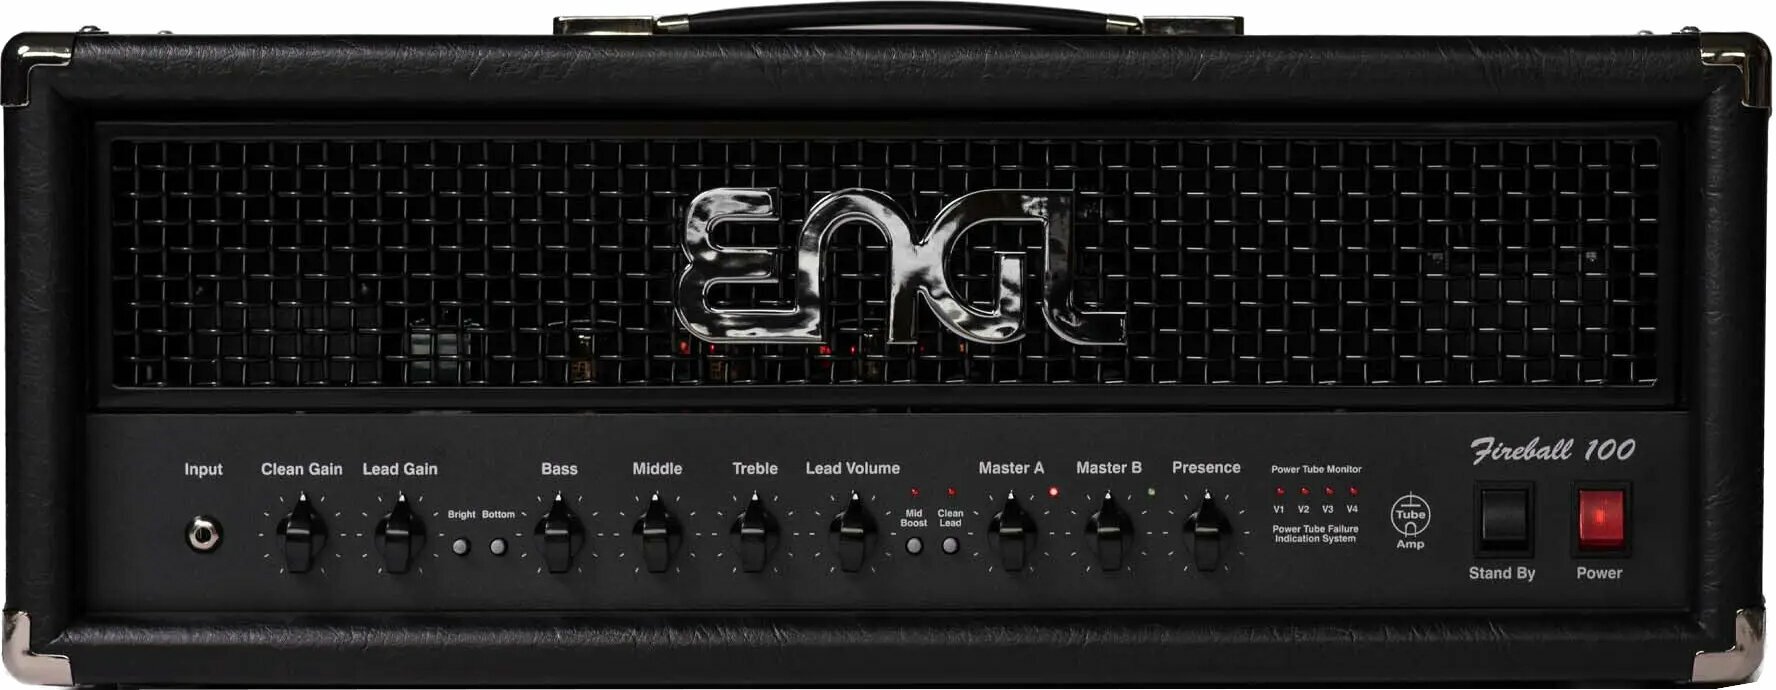 Tube Amplifier Engl E635 Fireball 100 (Just unboxed)